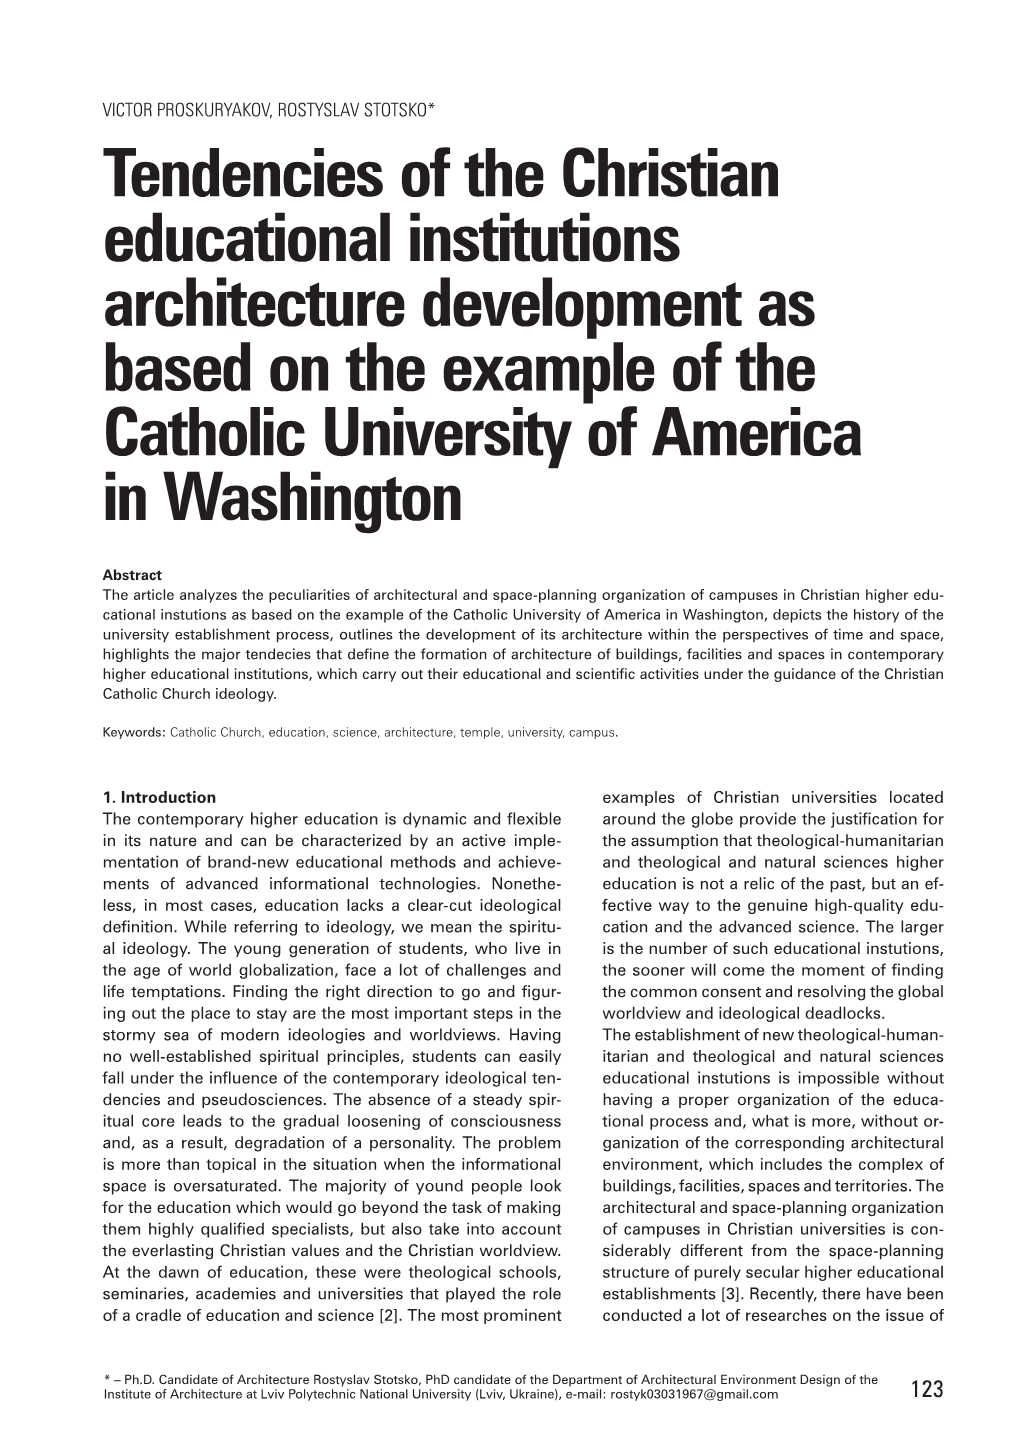 Tendencies of the Christian Educational Institutions Architecture Development As Based on the Example of the Catholic University of America in Washington